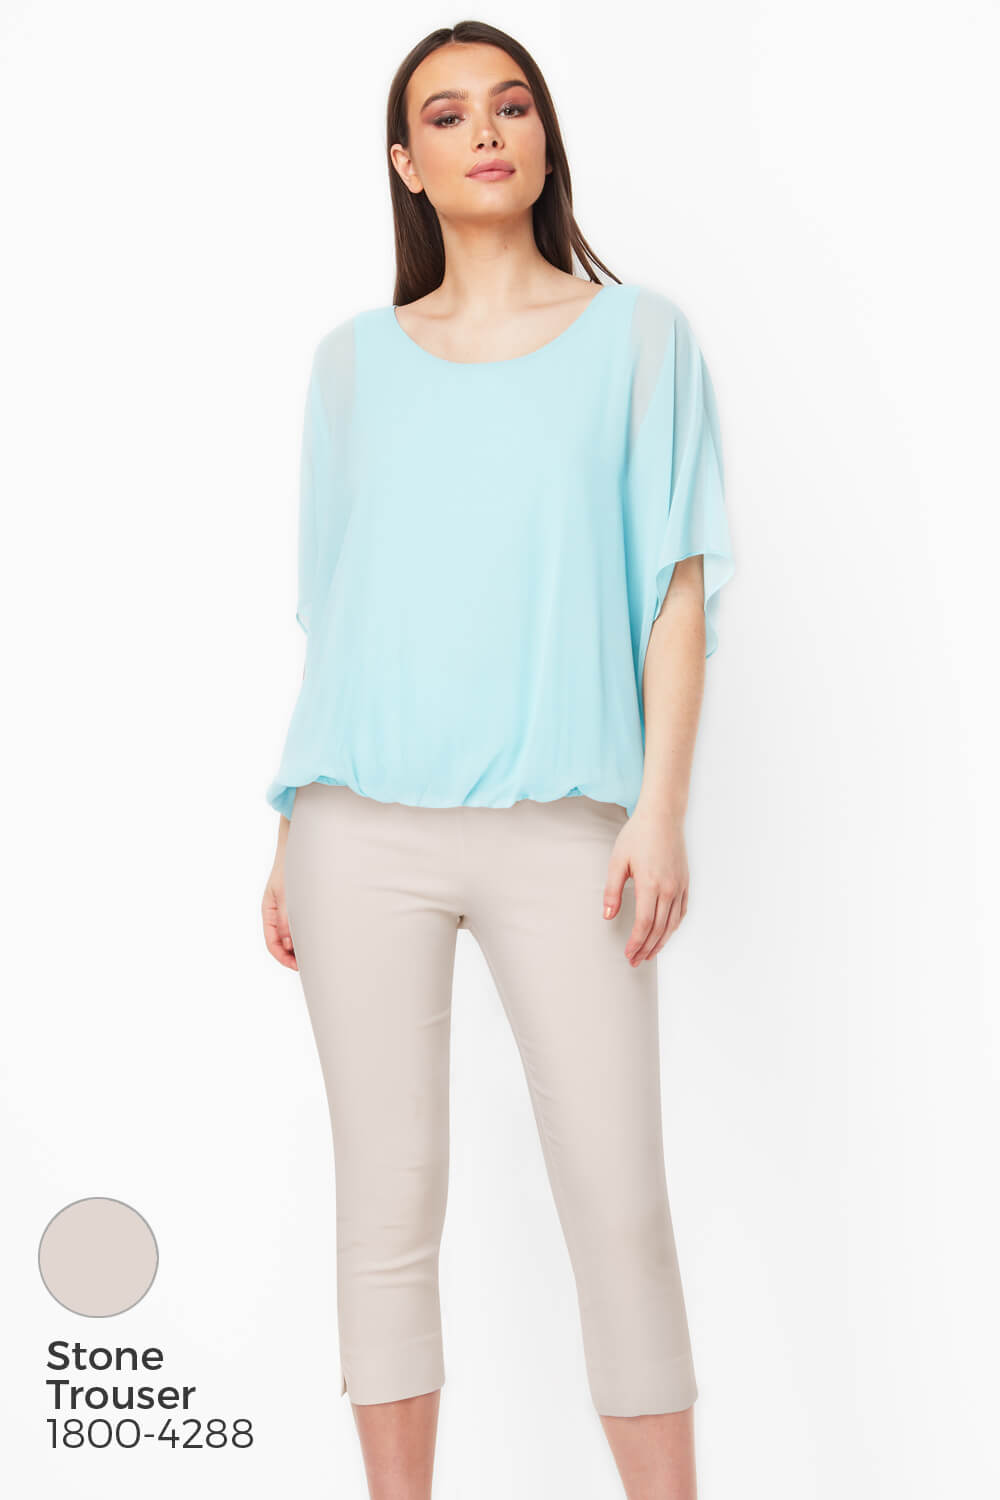 Turquoise Bubble Hem Top, Image 7 of 8